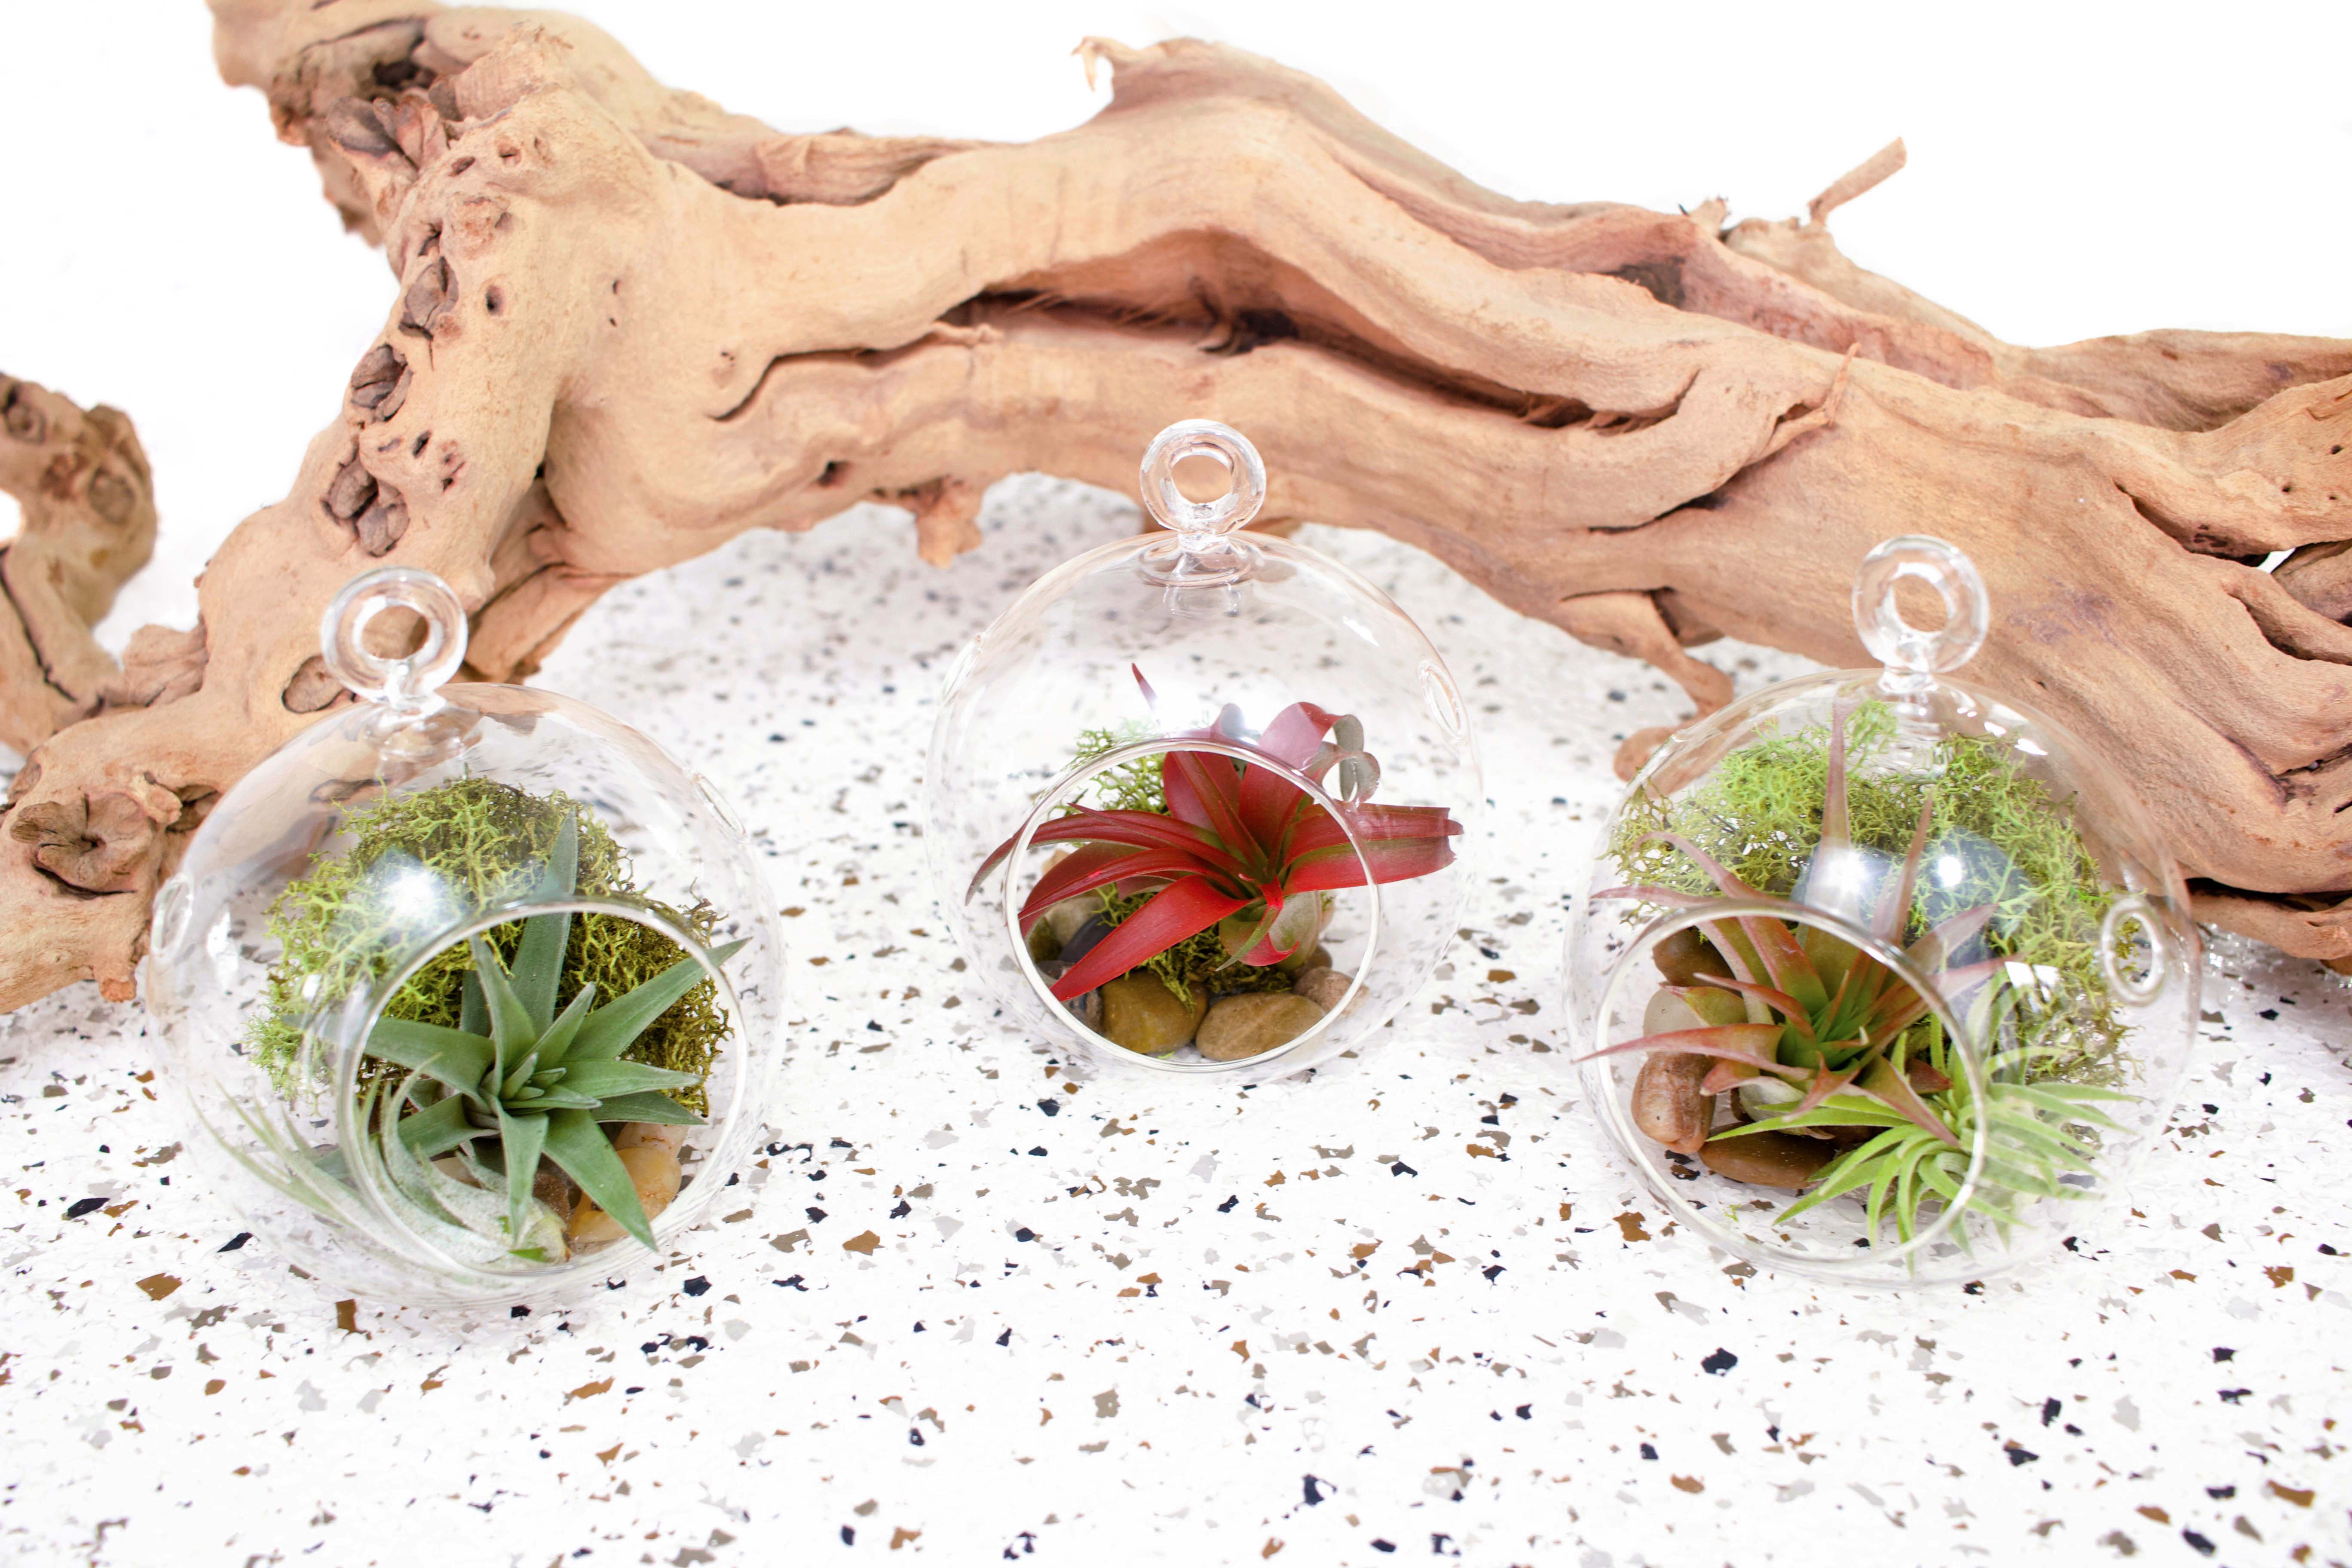 3 Flat Bottom Glass Globe Terrariums with Moss and RIver Stone Accents containing Assorted Tillandsia Air Plants